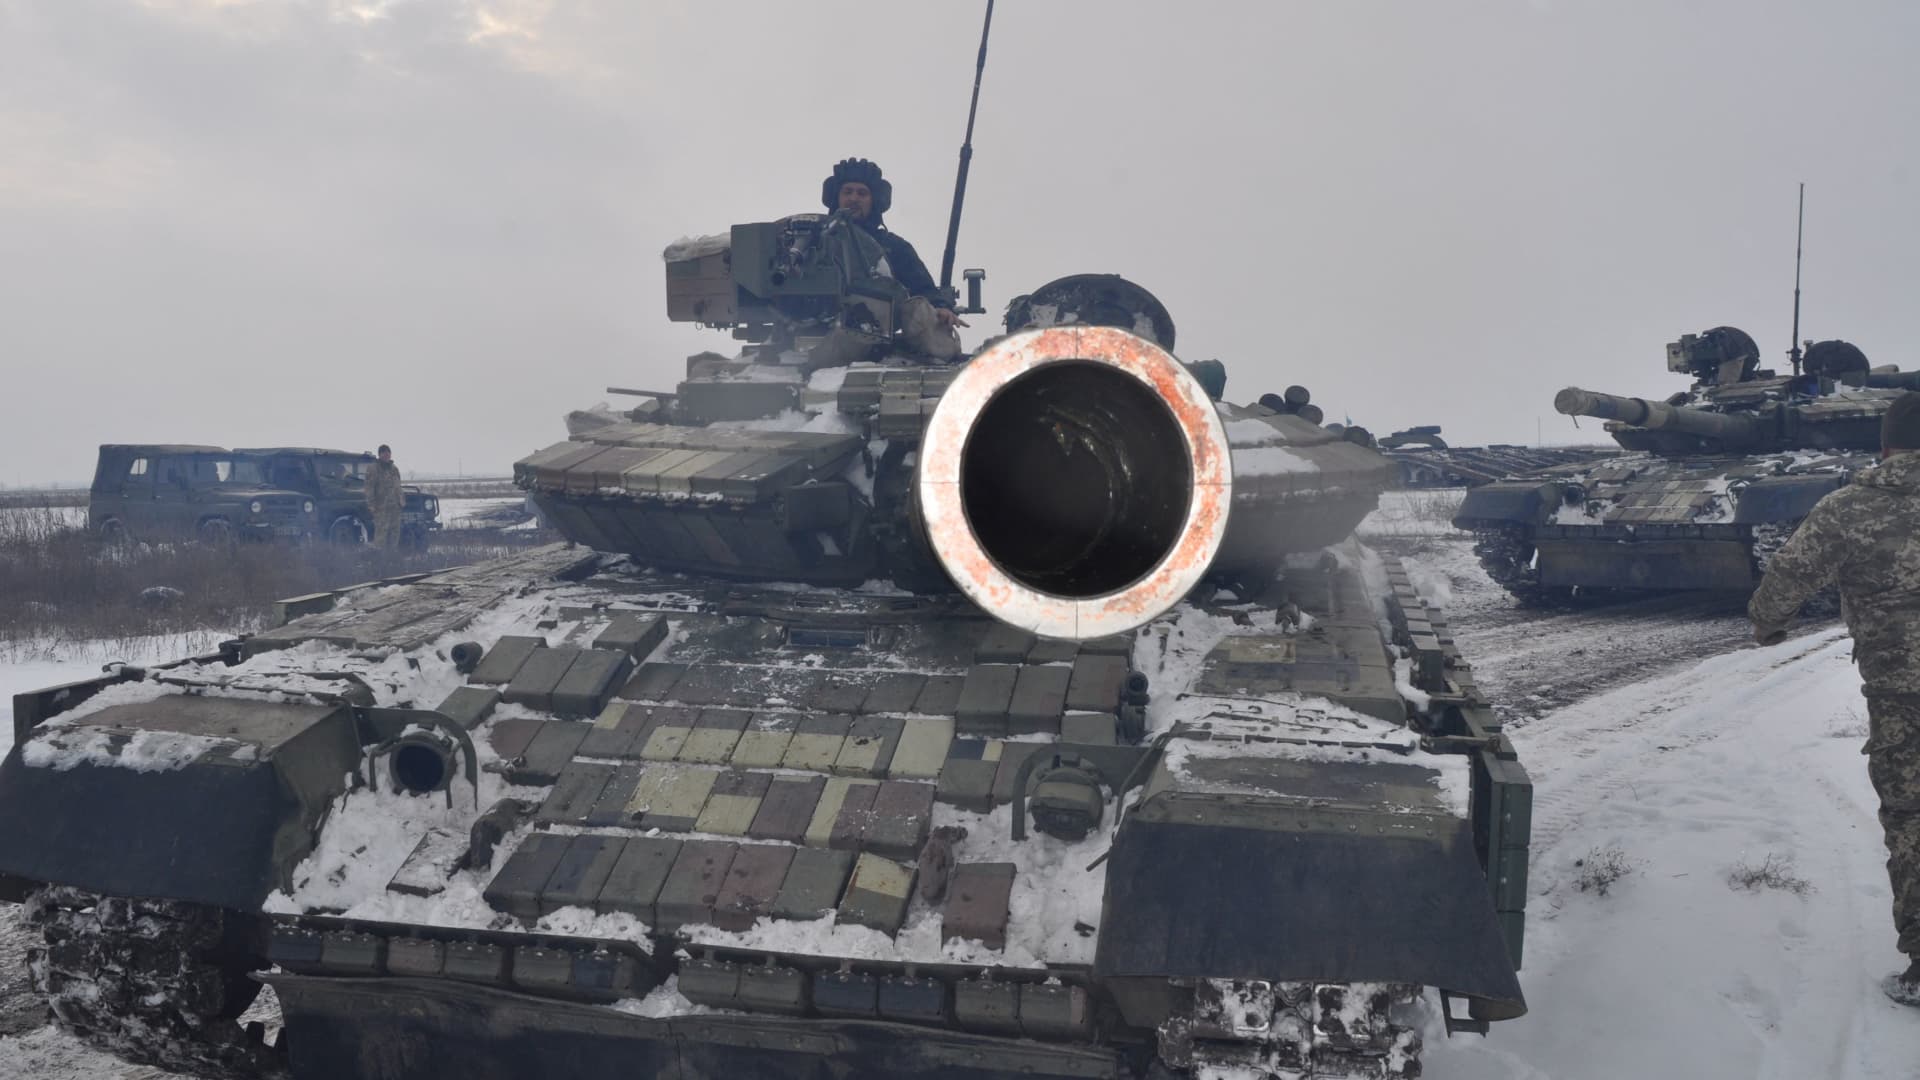 Service members of the Ukrainian Armed Forces drive tanks during tactical drills at a training ground in the Kherson region, Ukraine, in this handout picture released February 7, 2022.